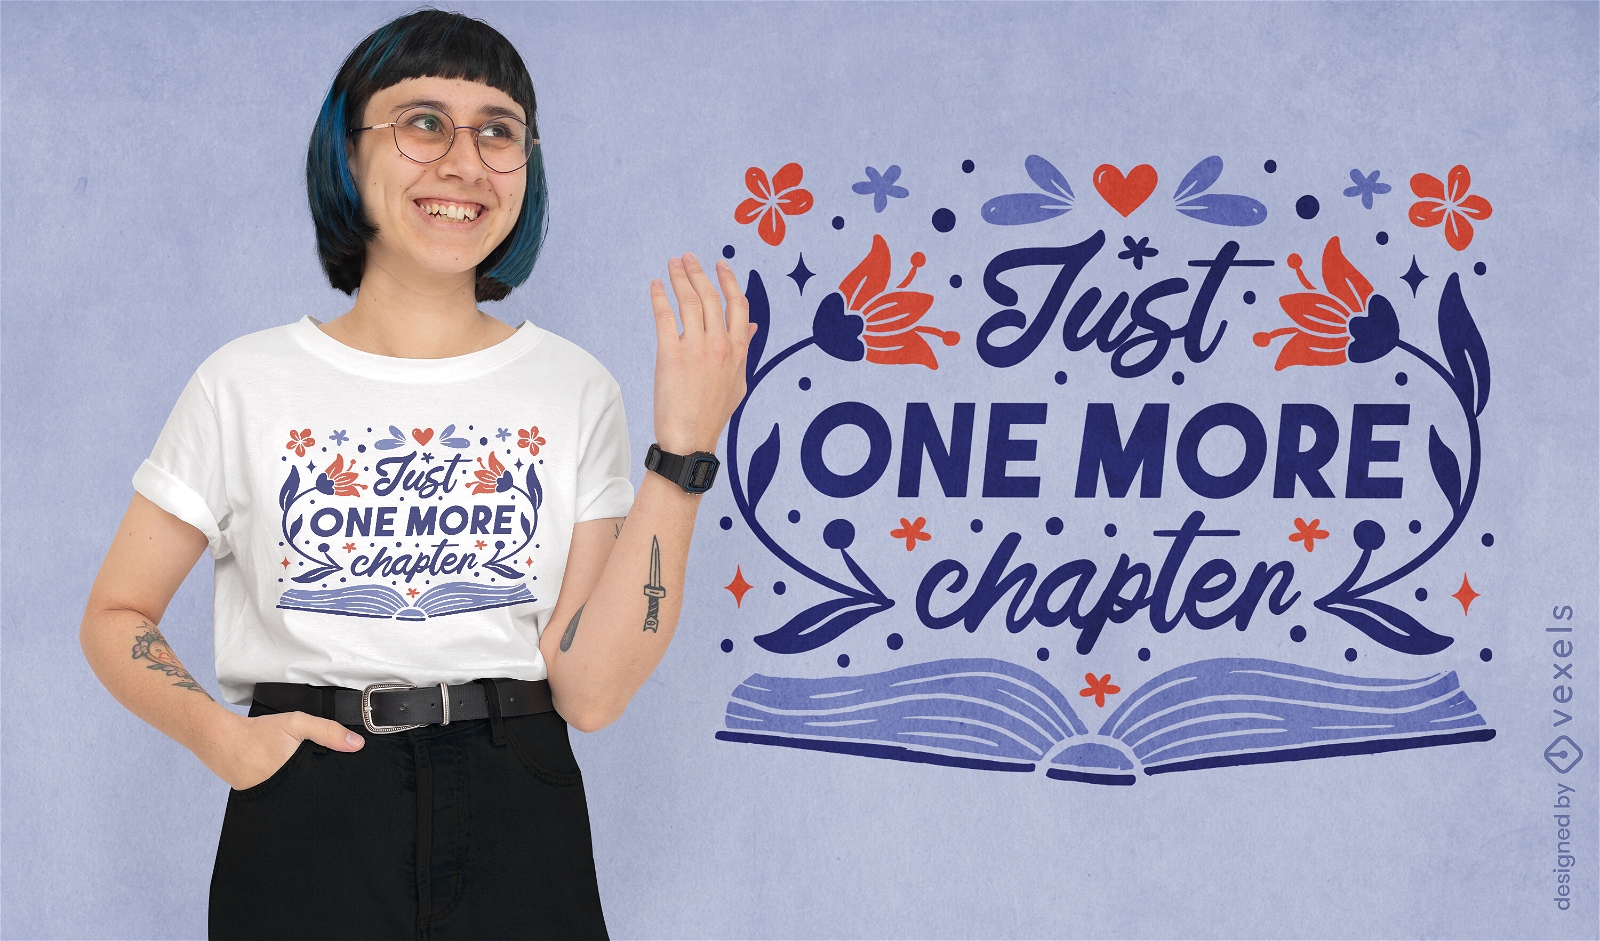 One more chapter book quote t-shirt design